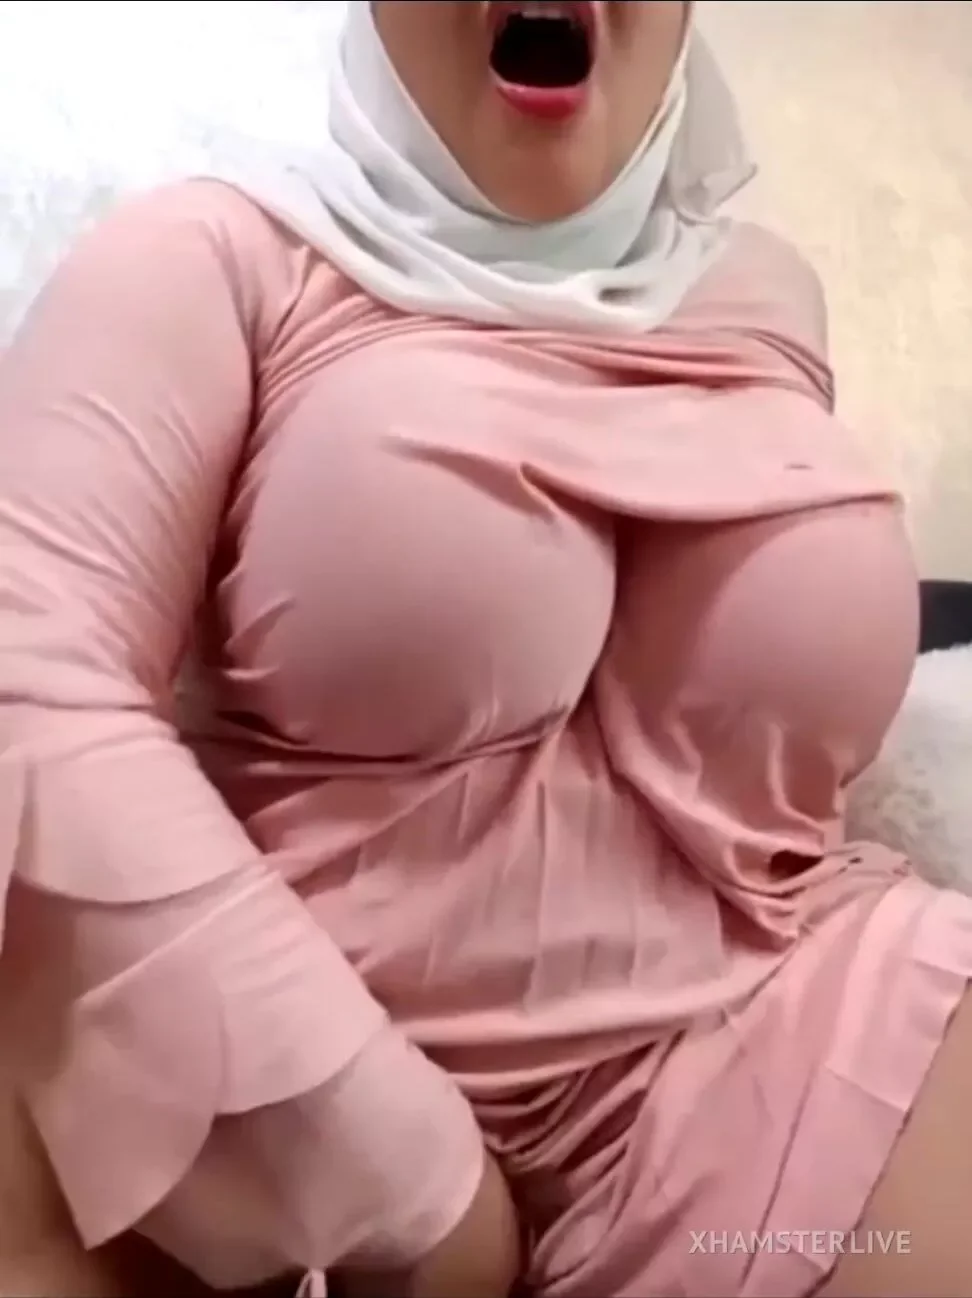 Amal Arabic Big Boobs Camgirl Sucking Her Own Nipples And Rubbing Pussy Leaked Video pic